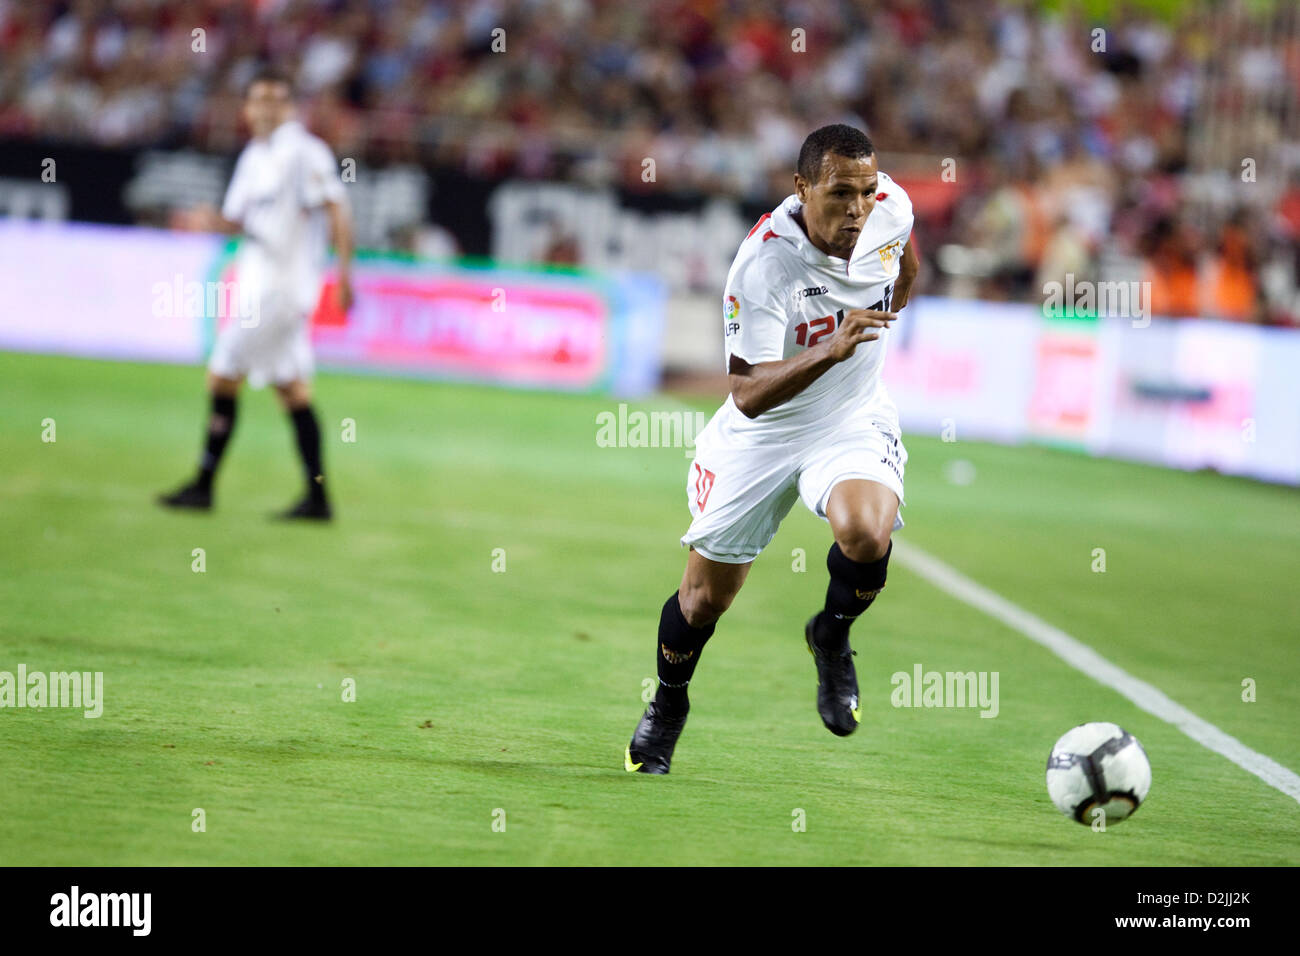 Seville, Spain, Luis Fabiano of Sevilla FC chases the ball in the game against Real Madrid Stock Photo